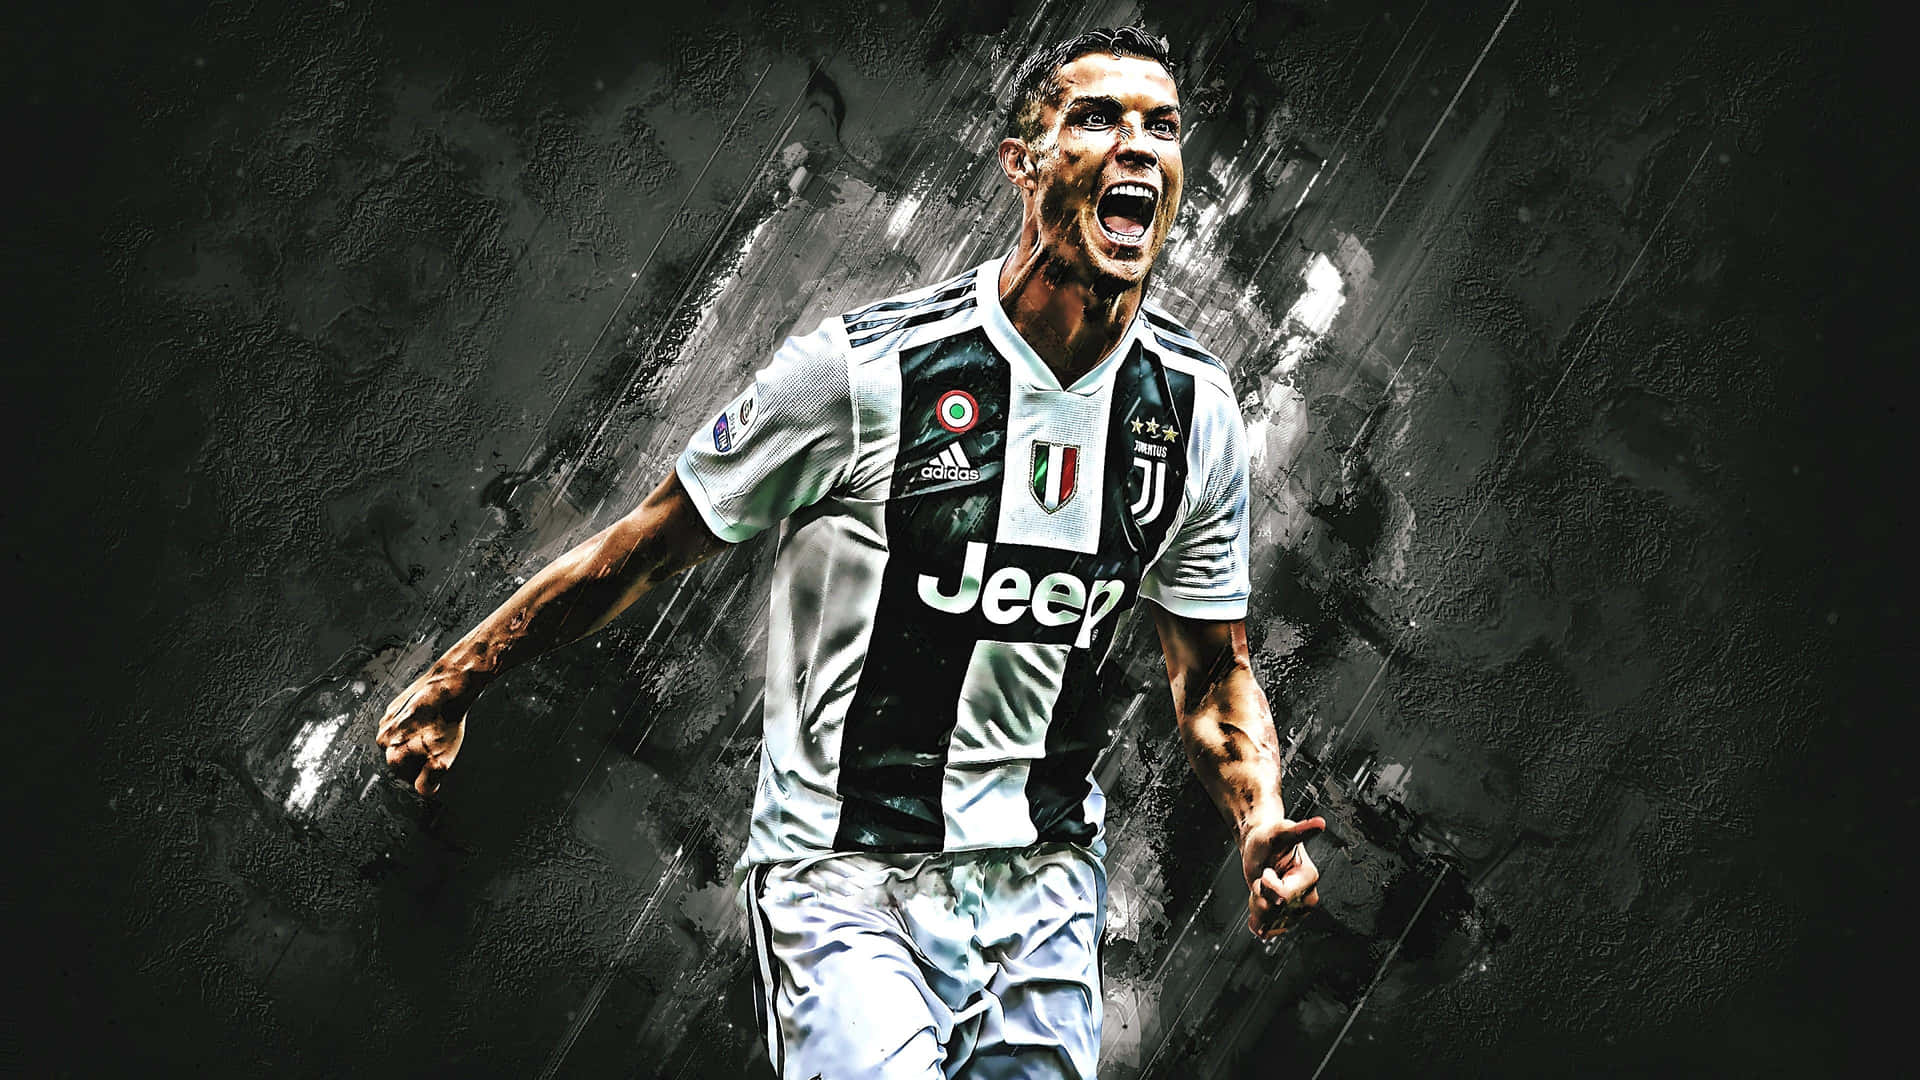 Cristiano Ronaldo makes it look easy on the pitch Wallpaper